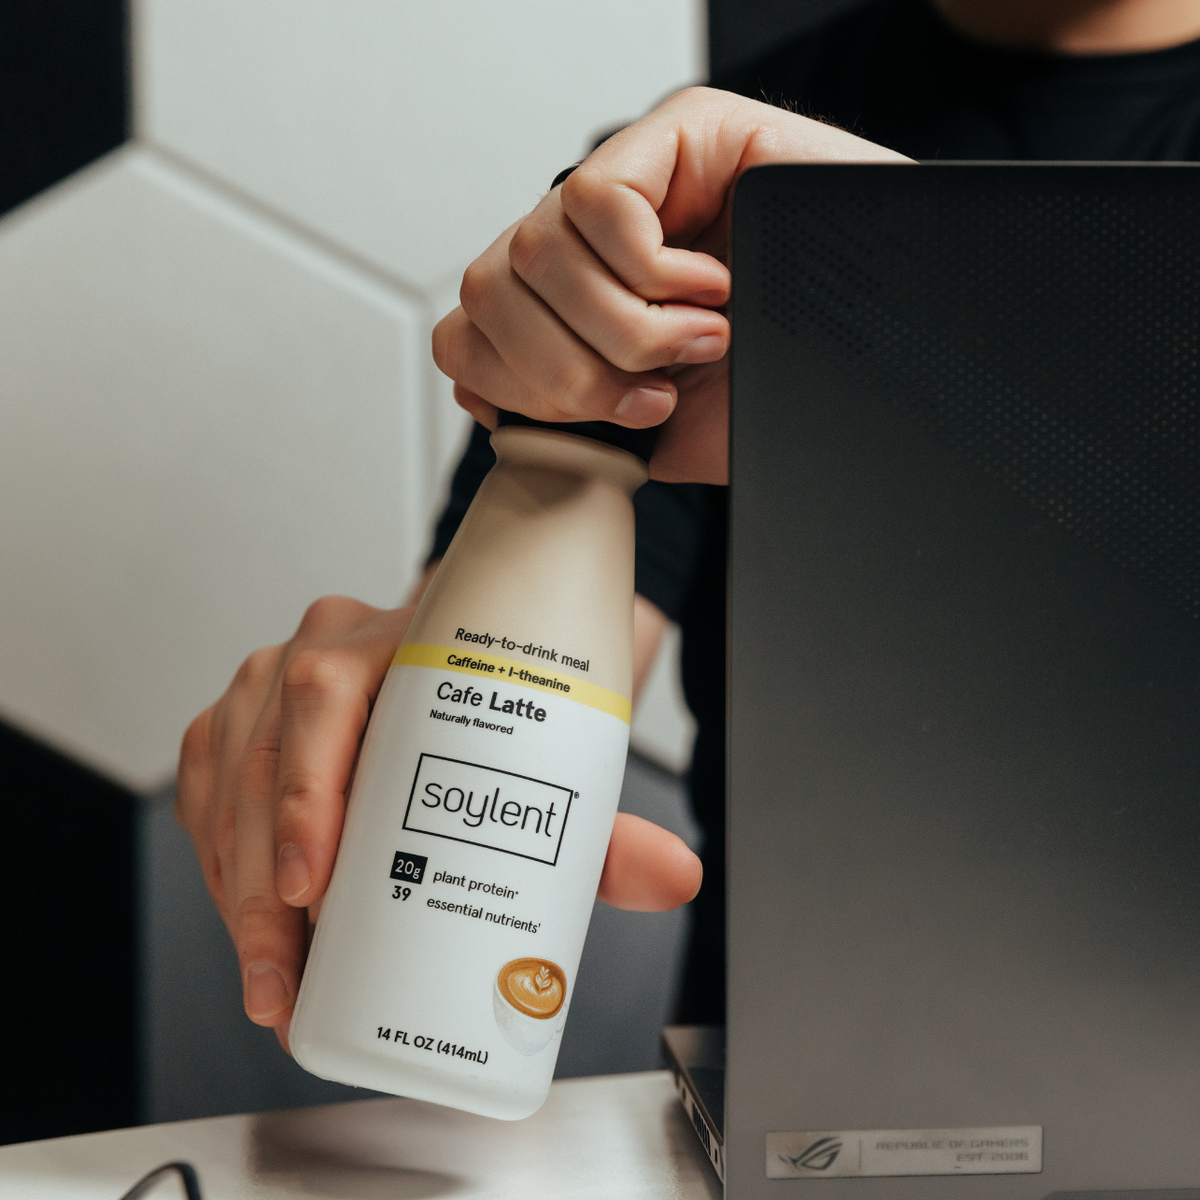 Soylent complete coffee variety pack